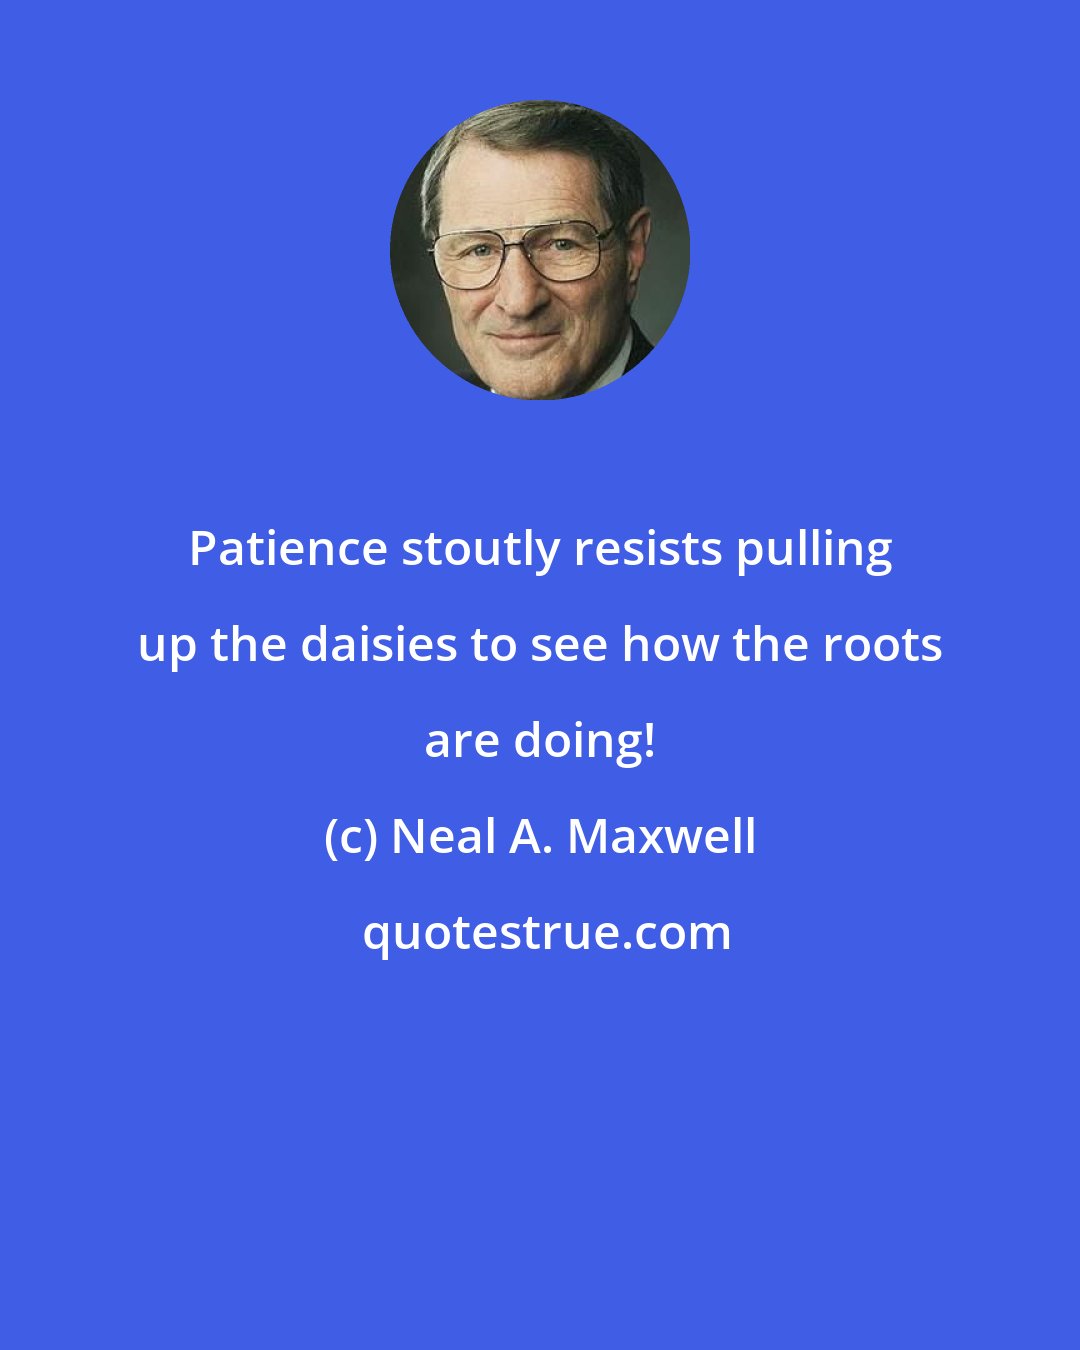 Neal A. Maxwell: Patience stoutly resists pulling up the daisies to see how the roots are doing!